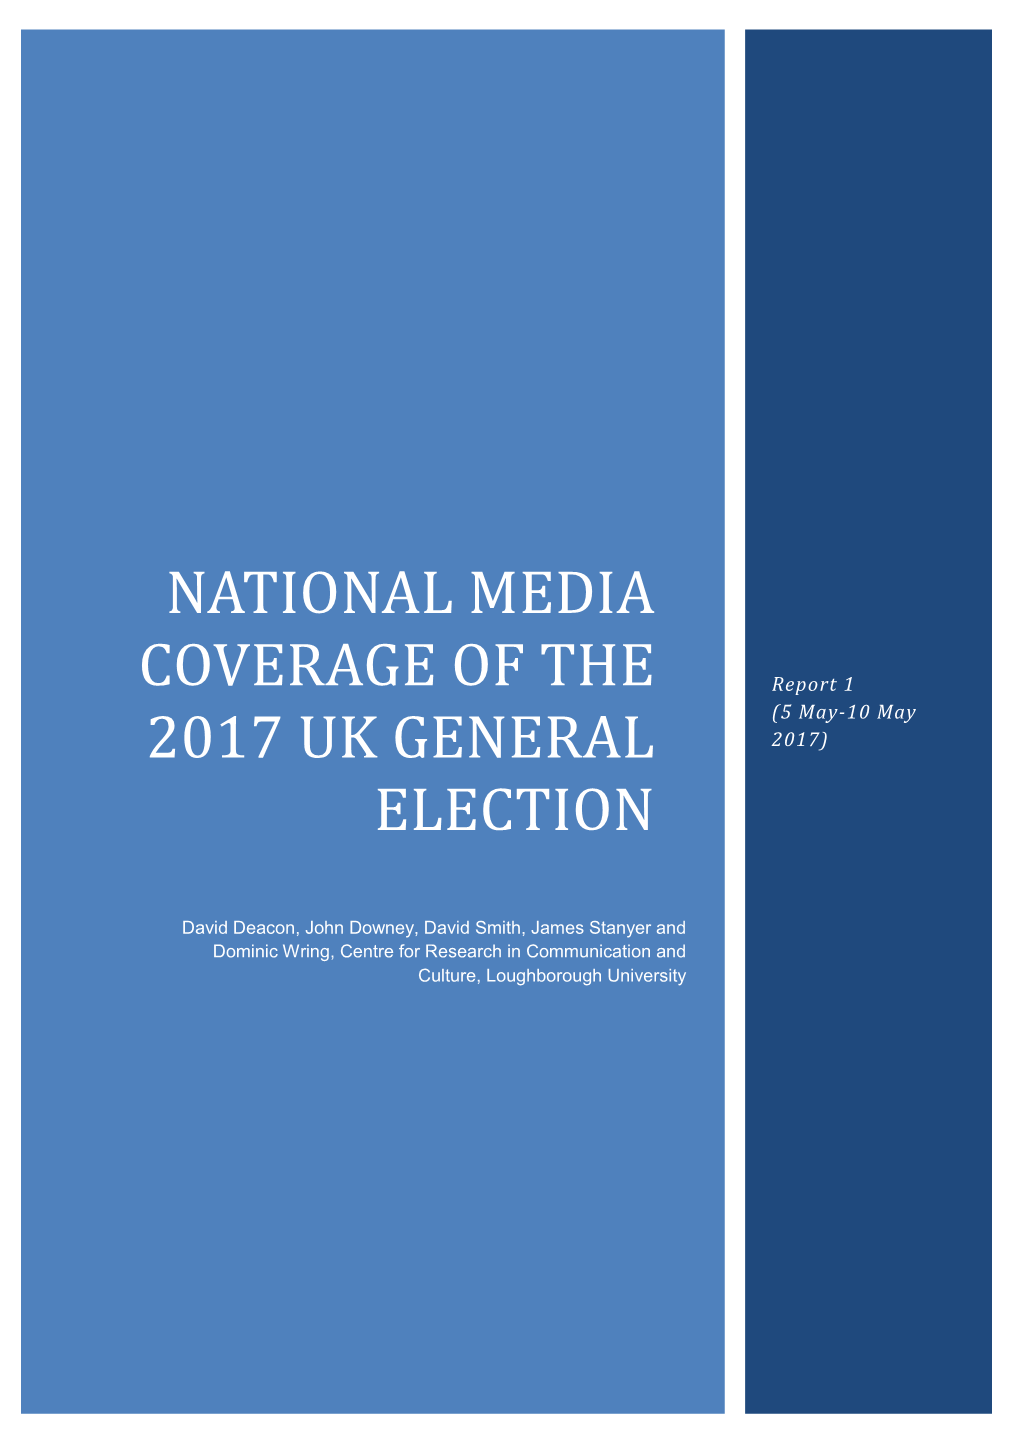 National Media Coverage of the 2017 UK General Election